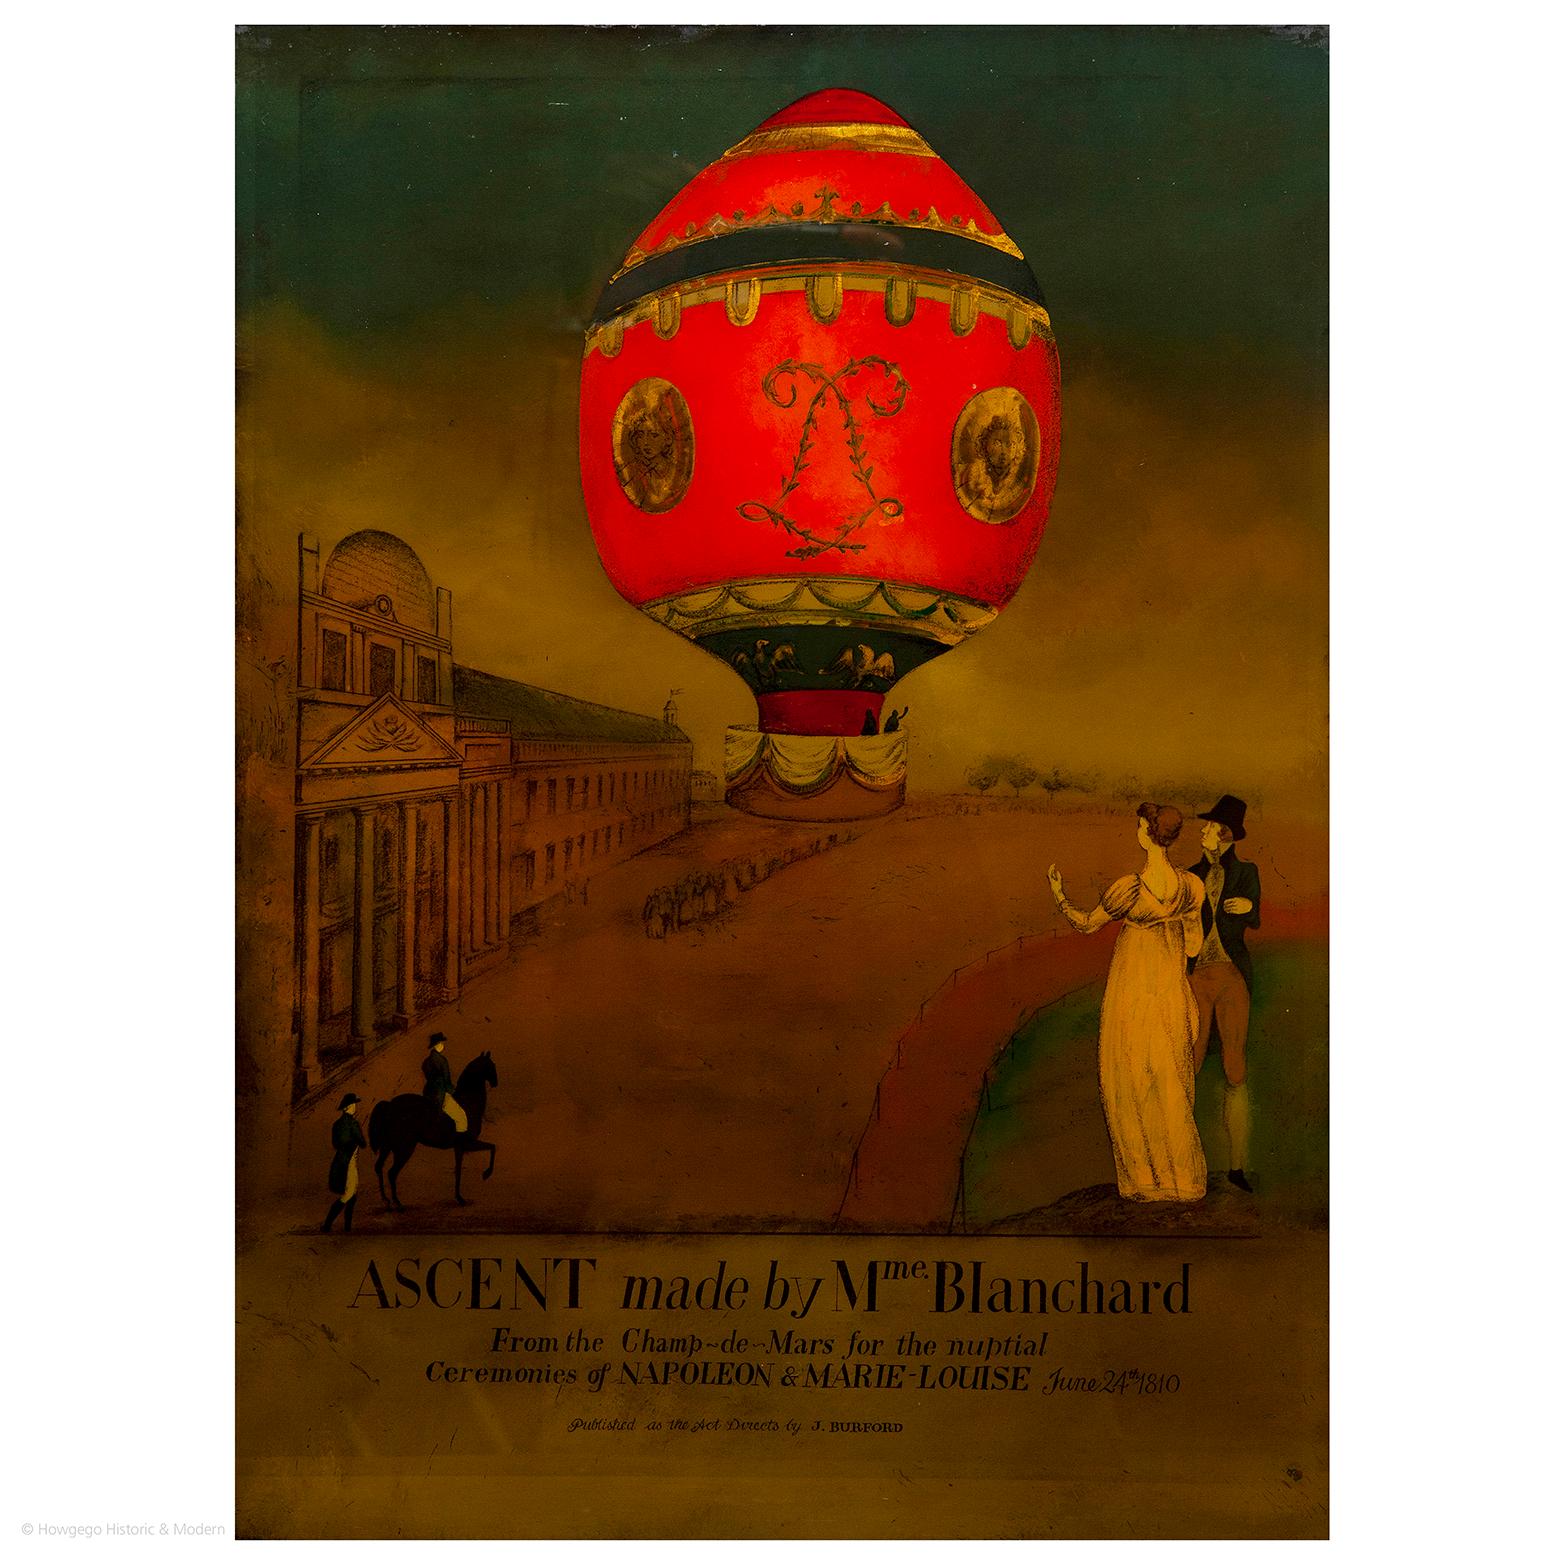 Verre églomisé of the balloon ascent made by Madame Blanchard from the Champ-de-Mars to celebrate the wedding of Napoleon and Marie Louise on 24th June 1810.  Inscribed ' Ascent made by Mme Blanchard.  From the Champ-de-Mars for the nuptial